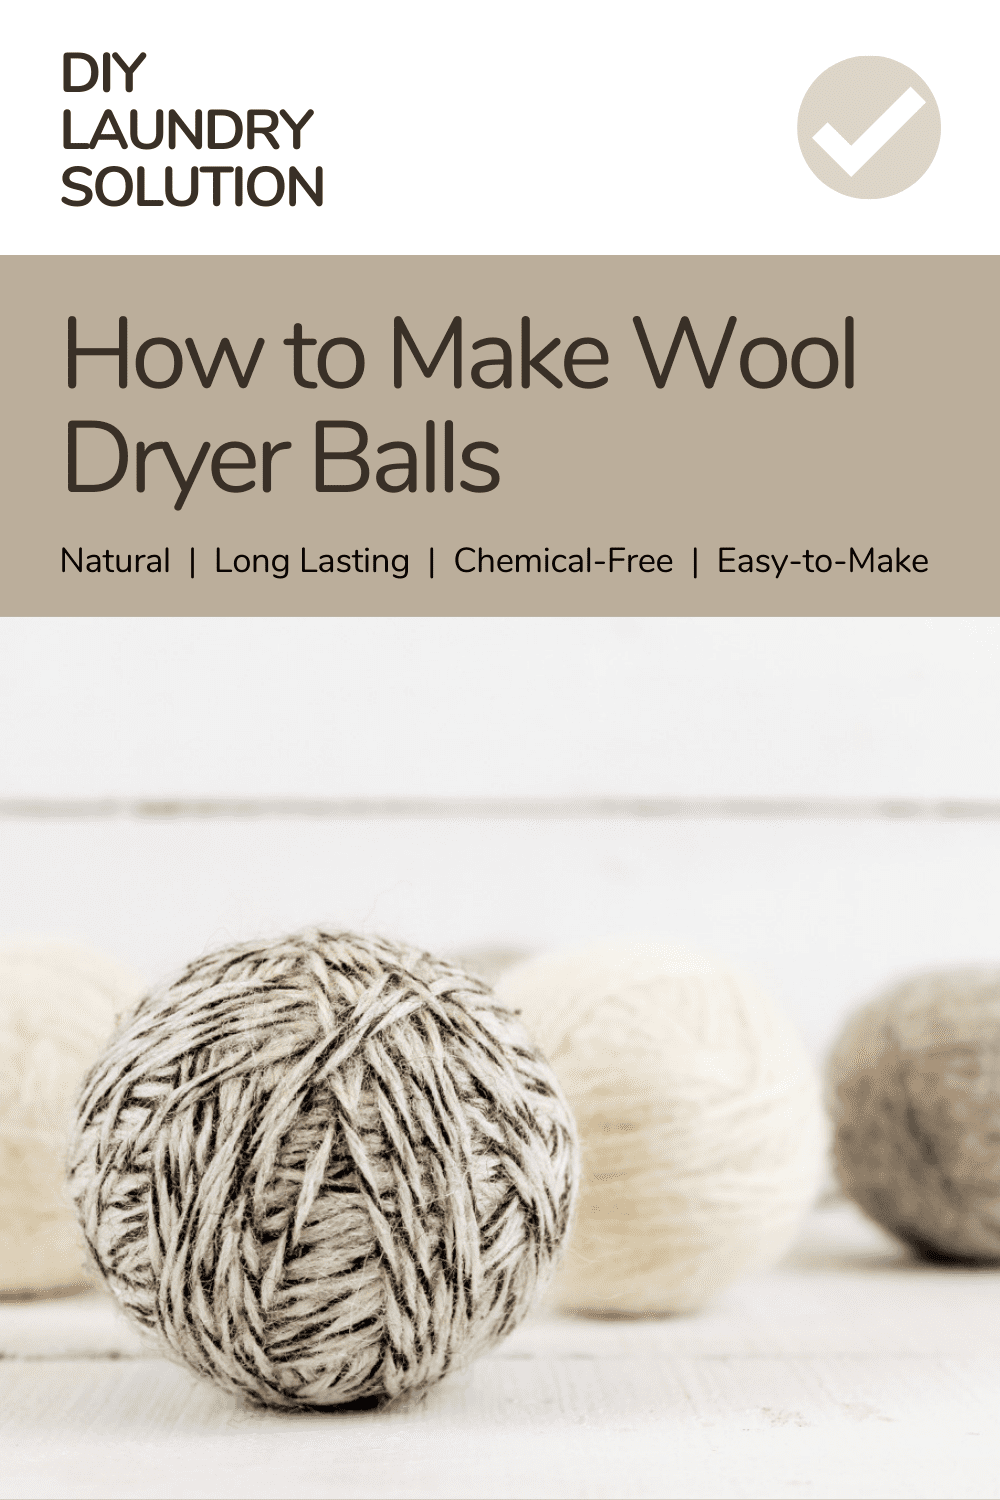 diy dryer balls lined up on a white wooden surface